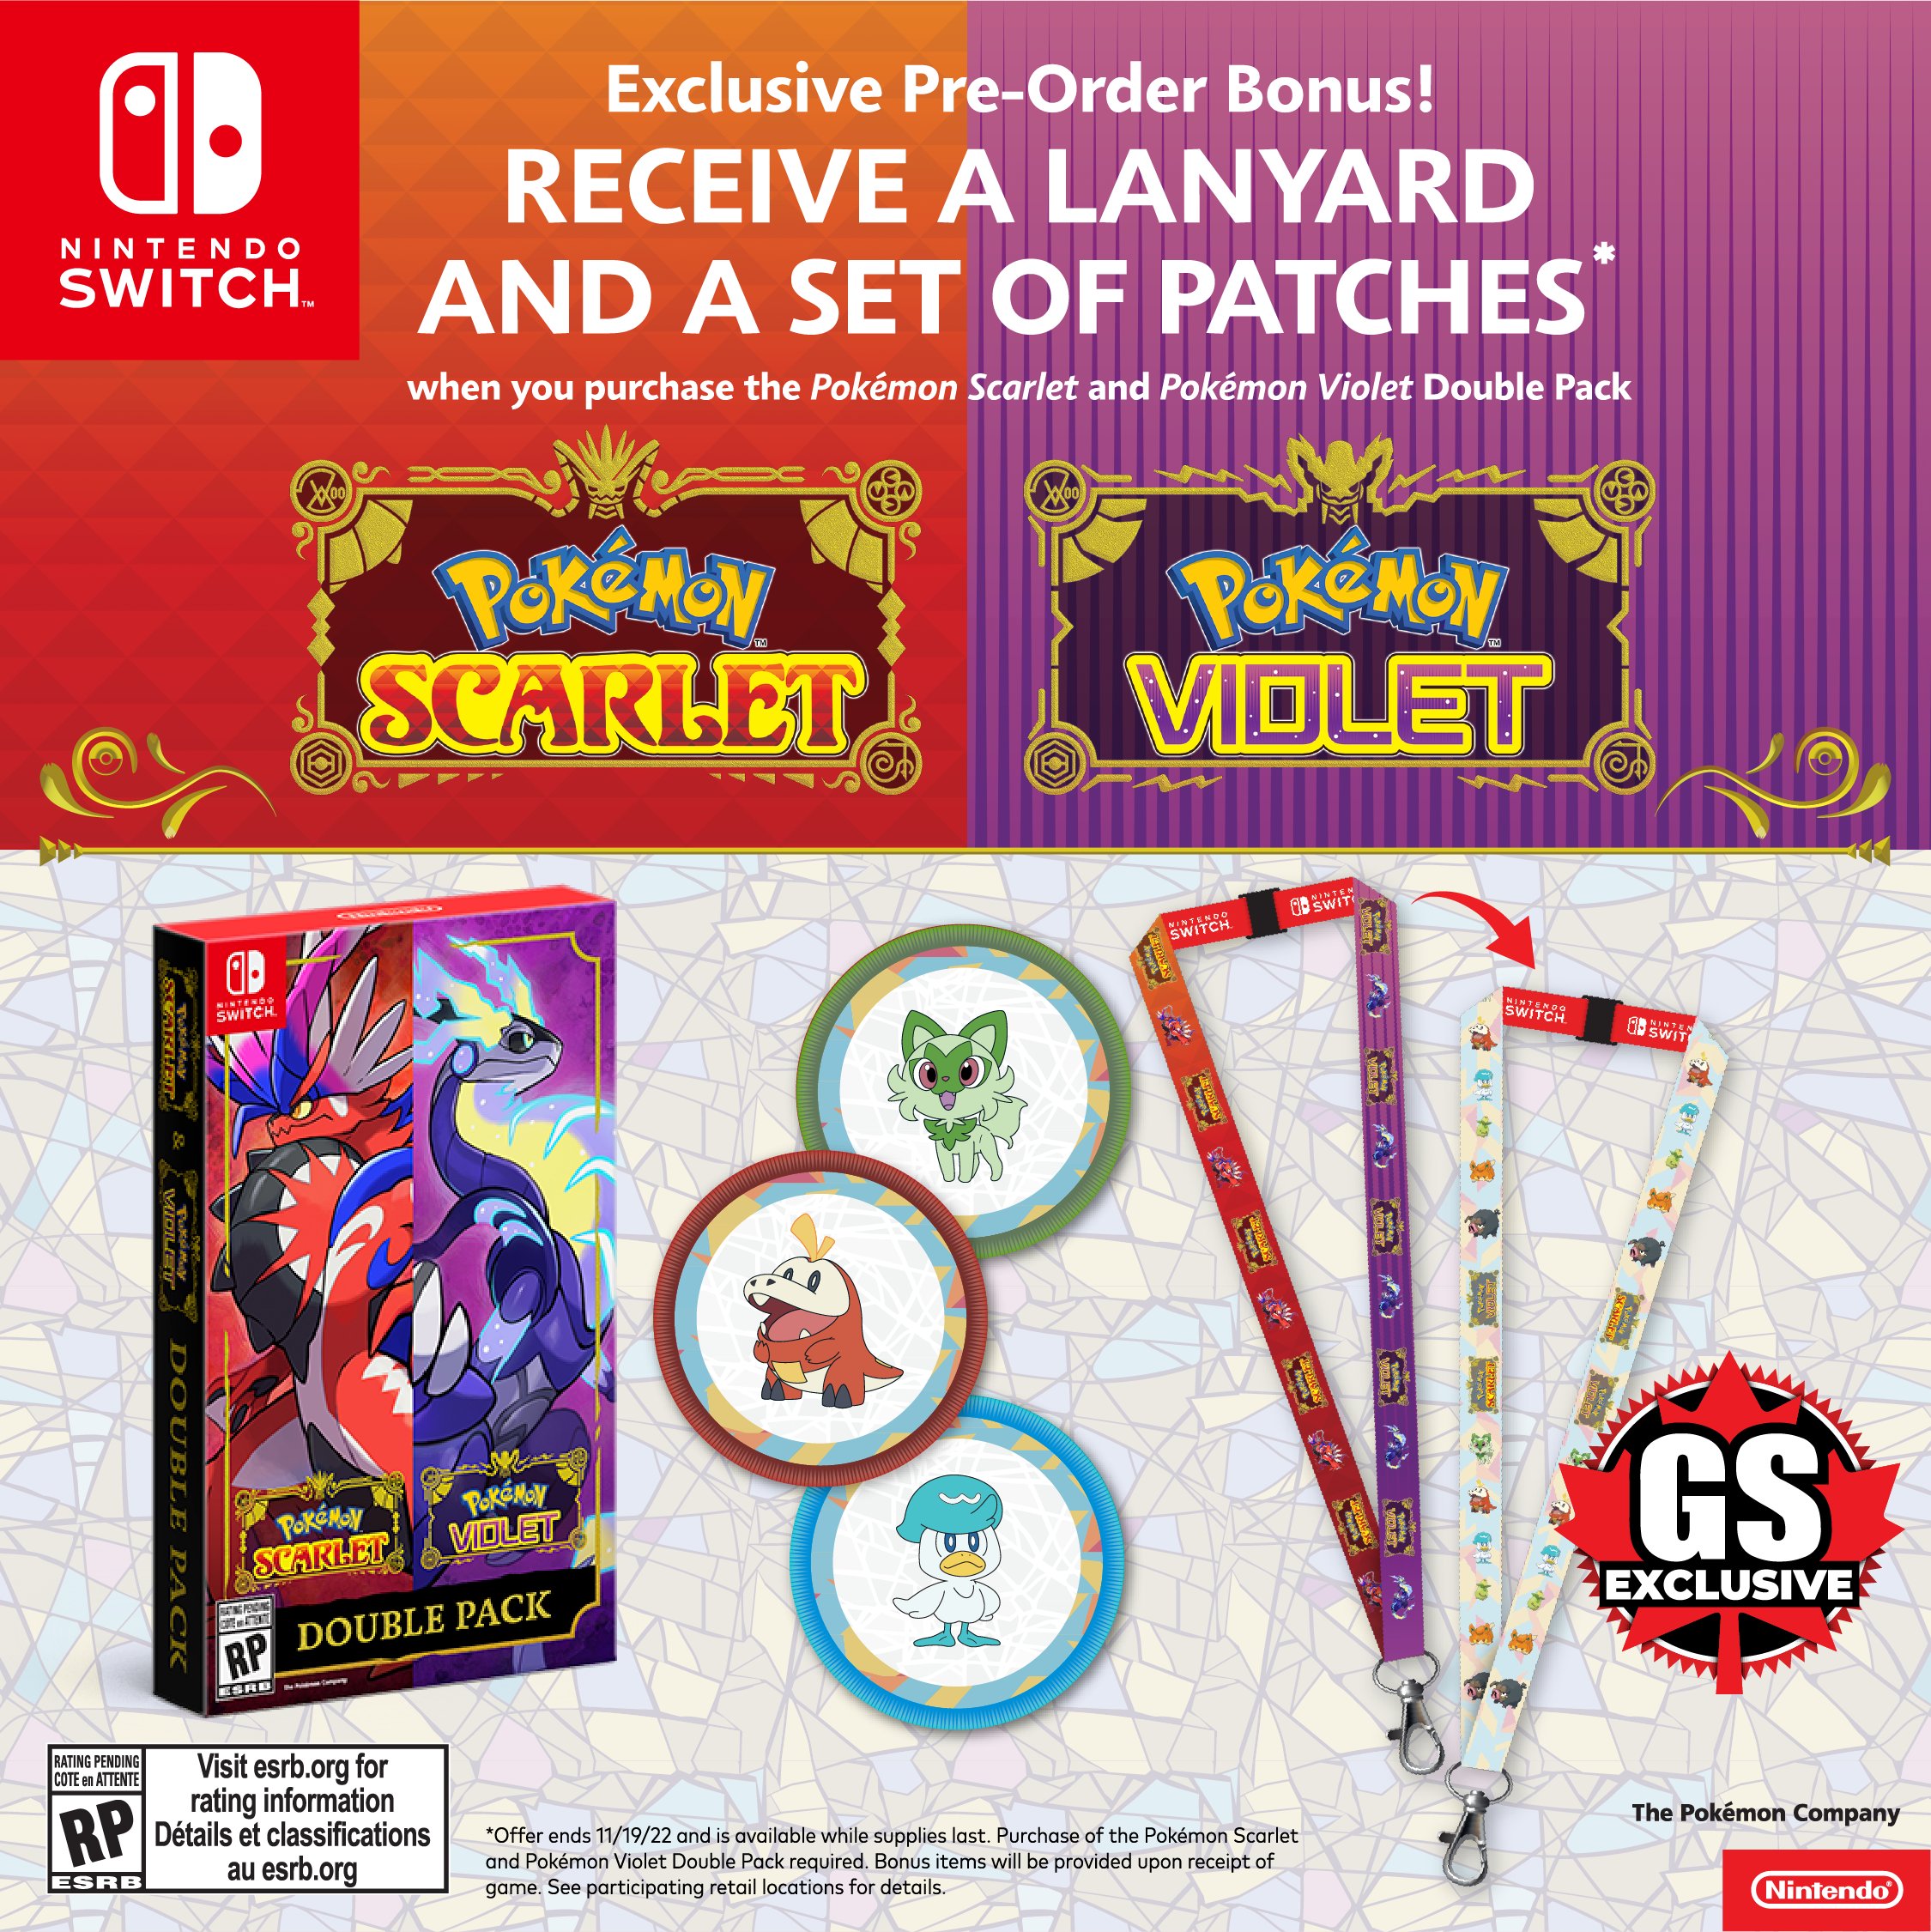 Use the code: LETSTERA on your Pokémon Scarlet & Violet Game to receiv